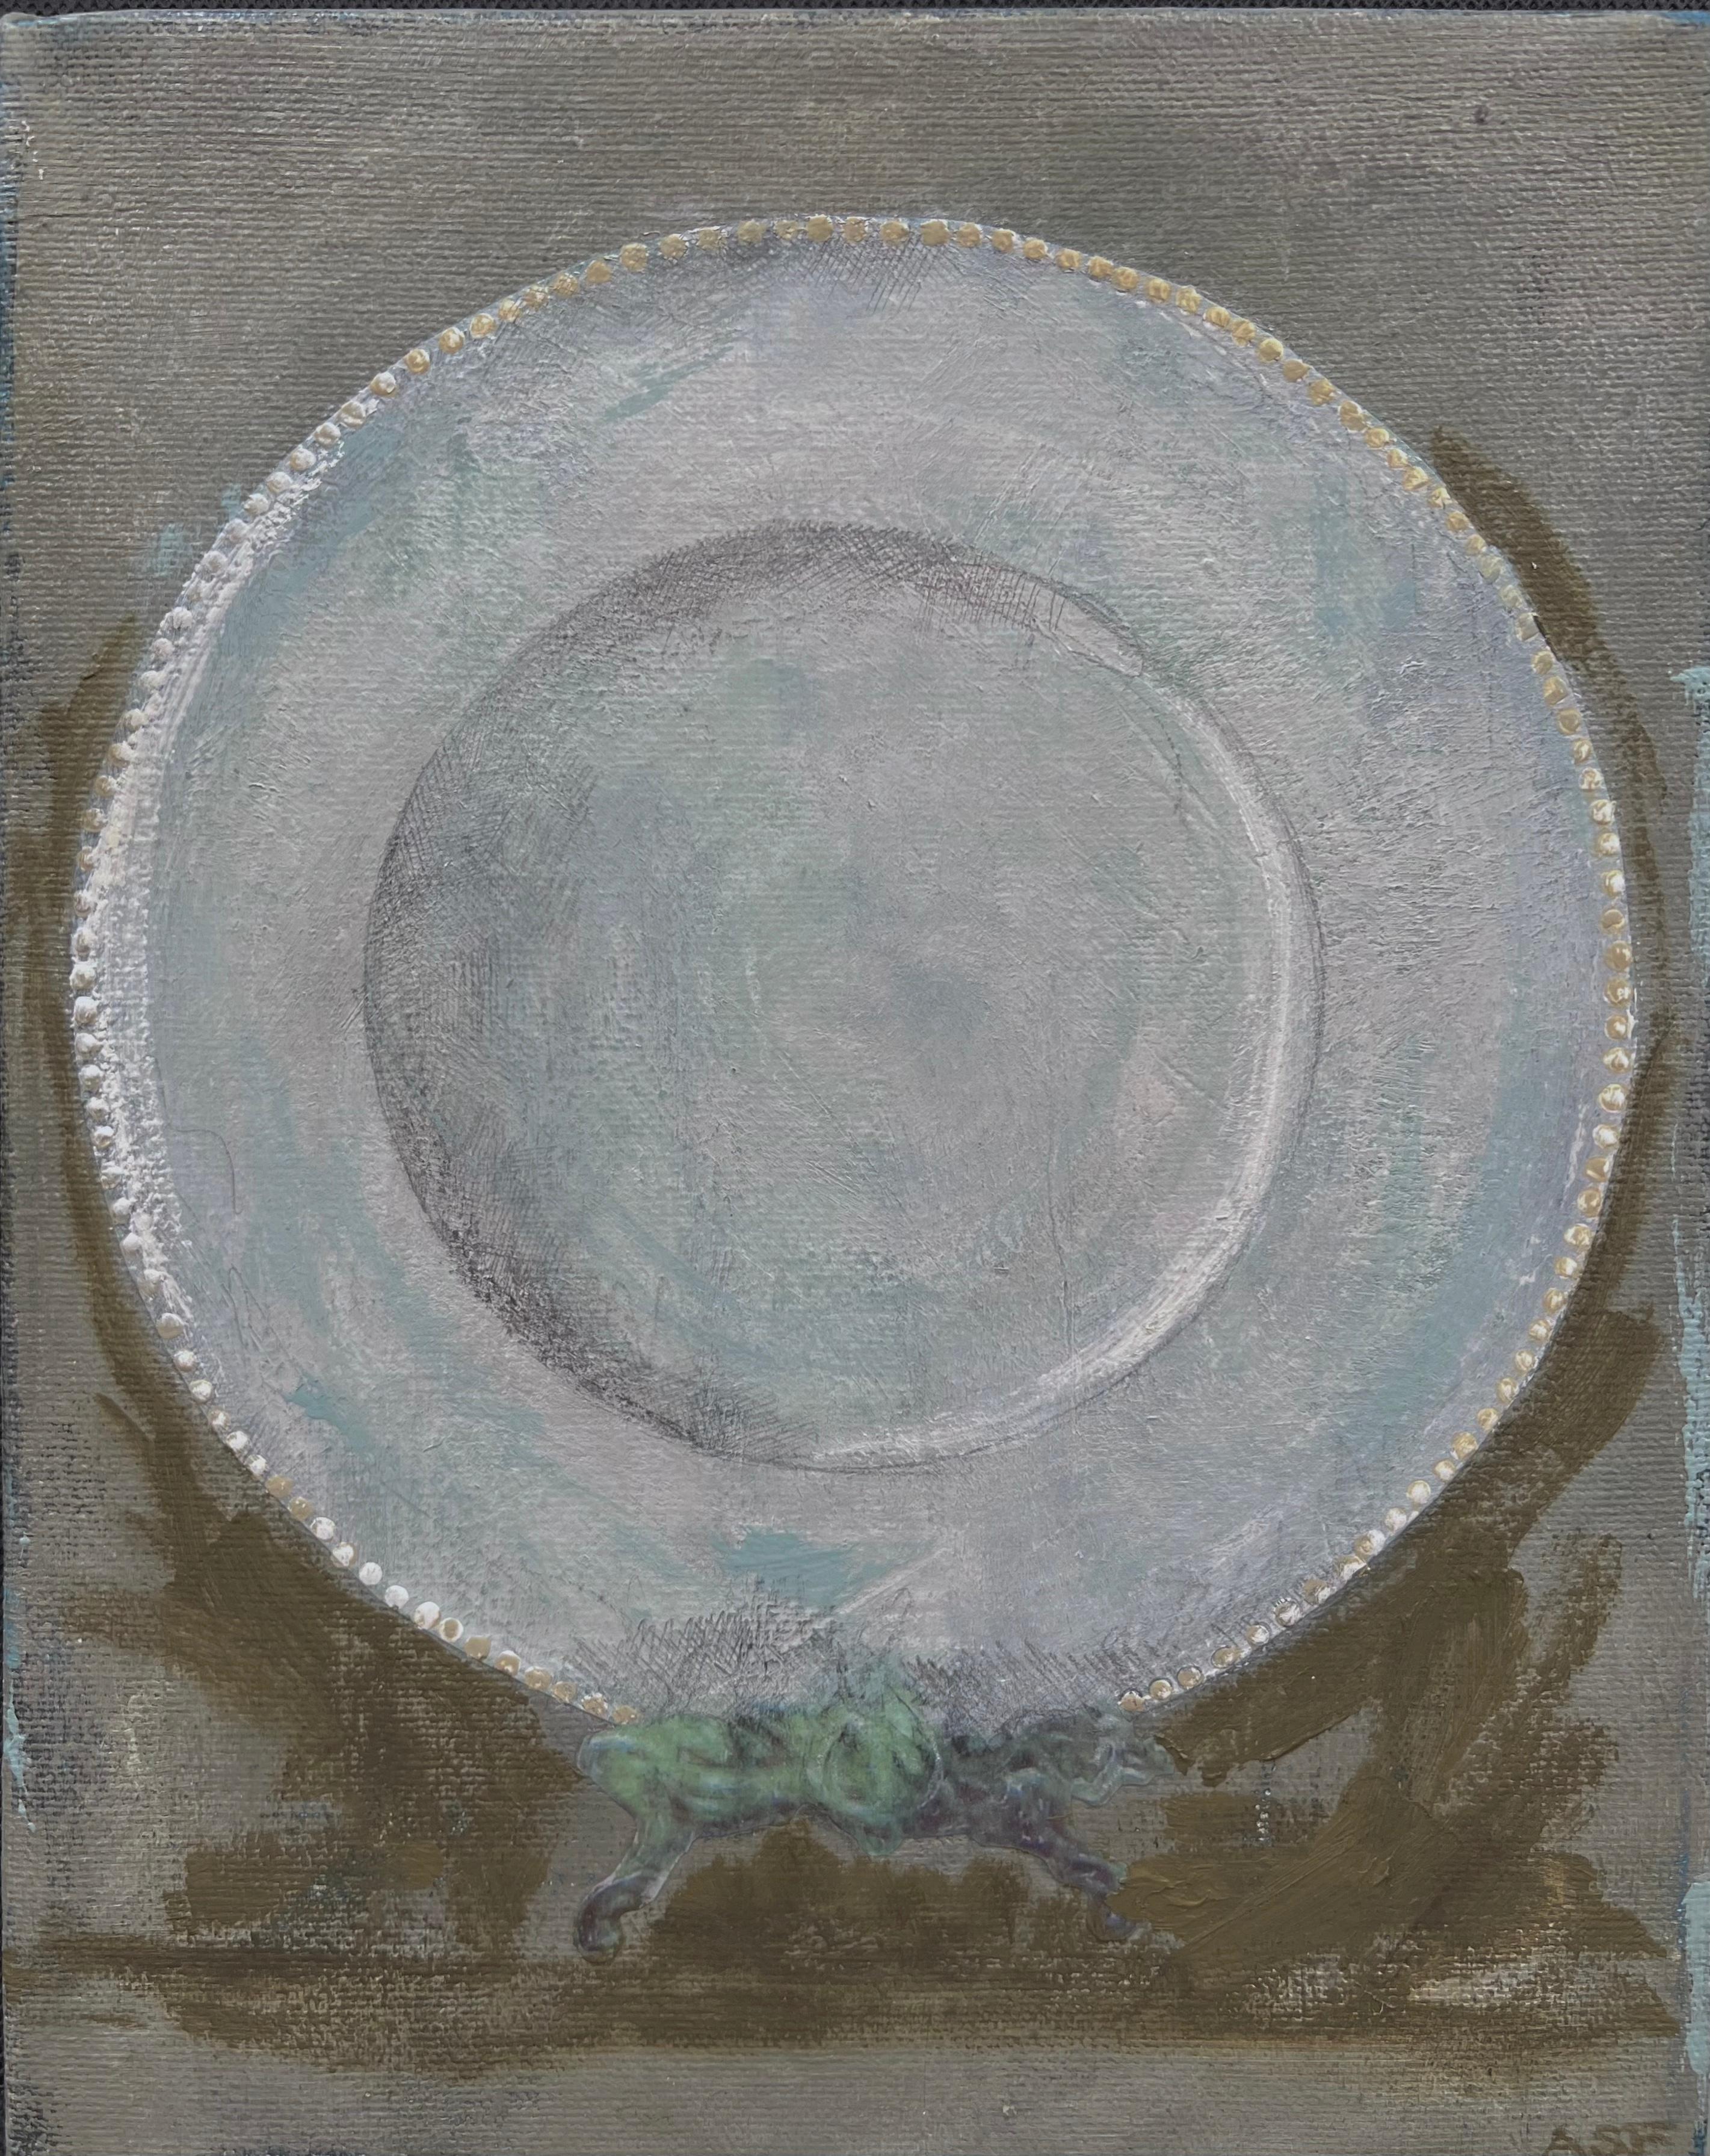 Dinner Plate 1 (8"x10", Still Life Painting On Canvas, Muted Green, White) - Art by Andrea Stajan-Ferkul